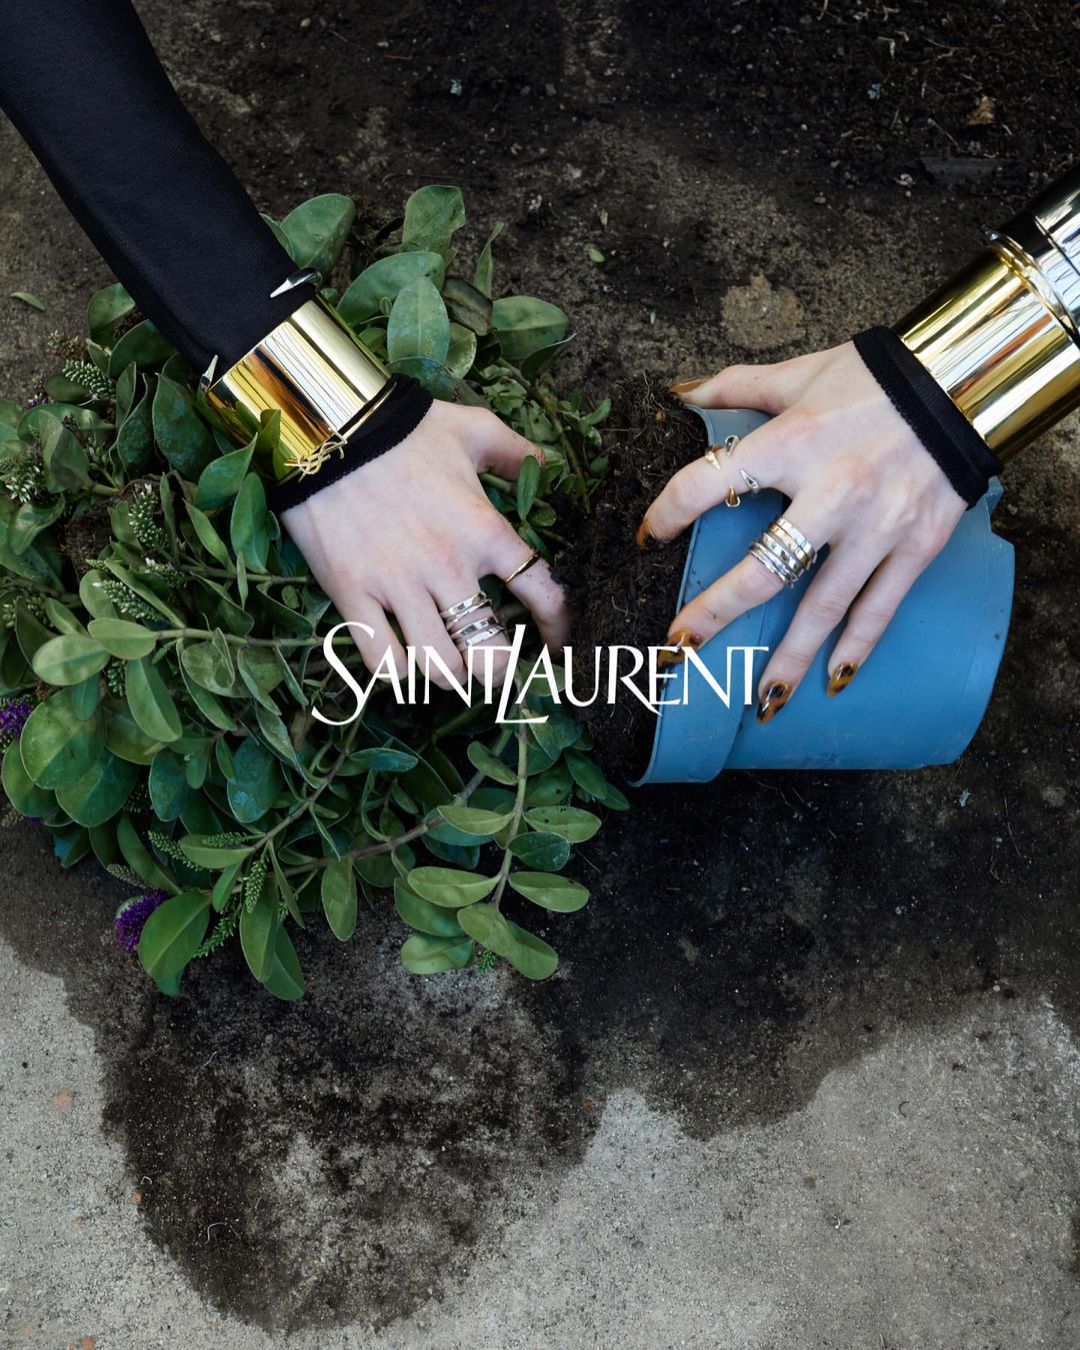 Yves Saint Laurent jewelry collection